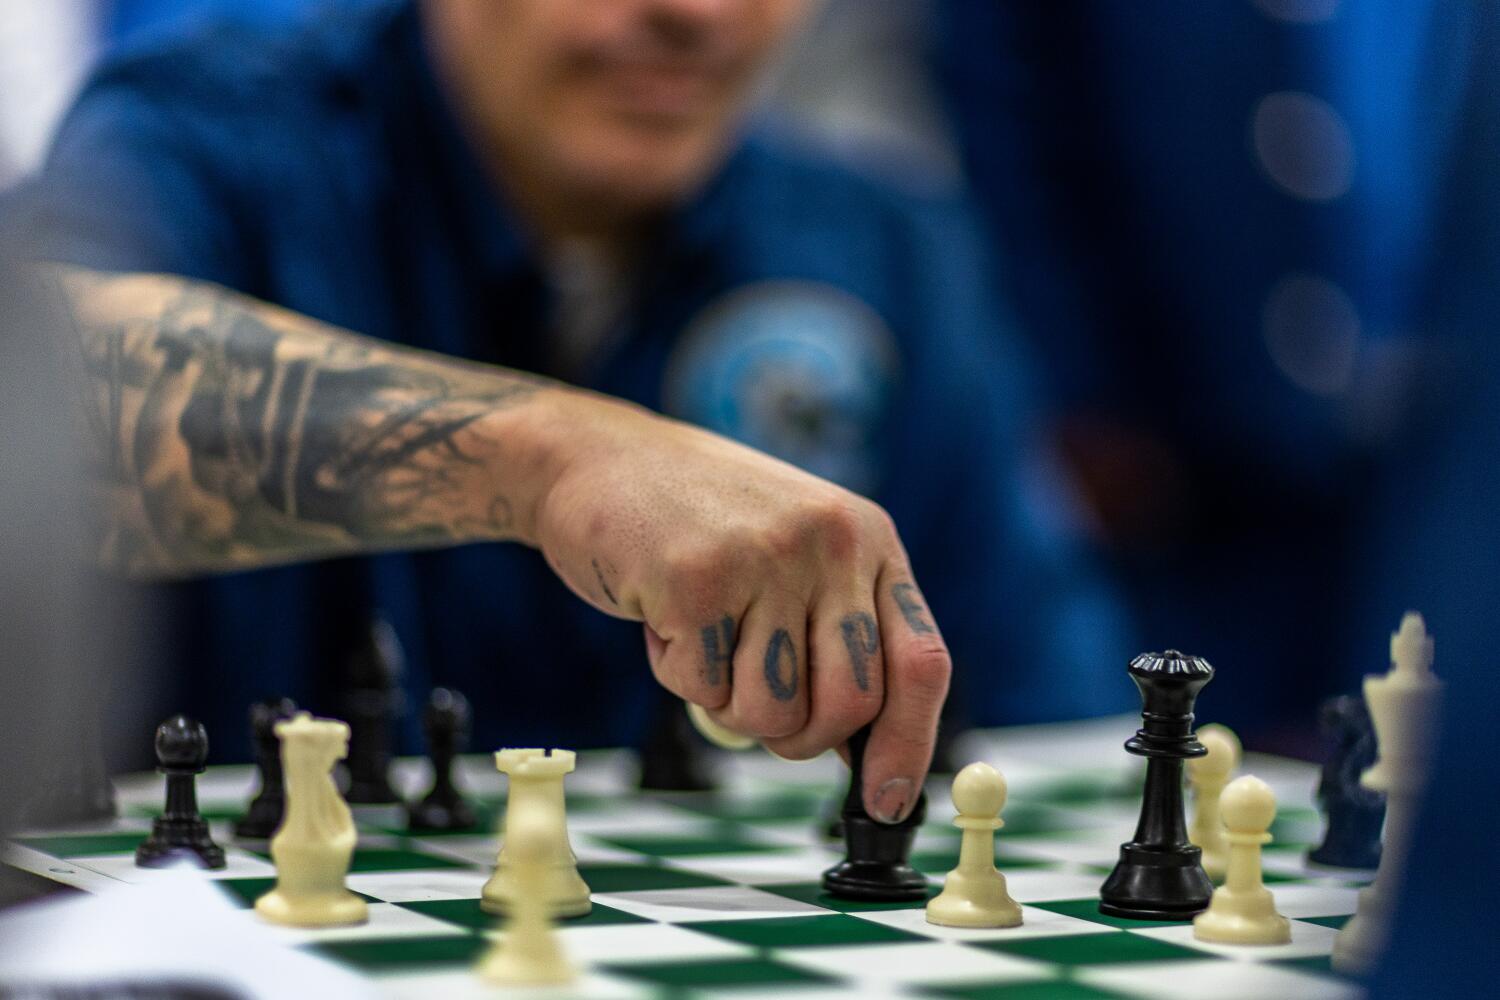 Can chess games and toilet paper change prison culture? Inside San Quentin's big experiment 